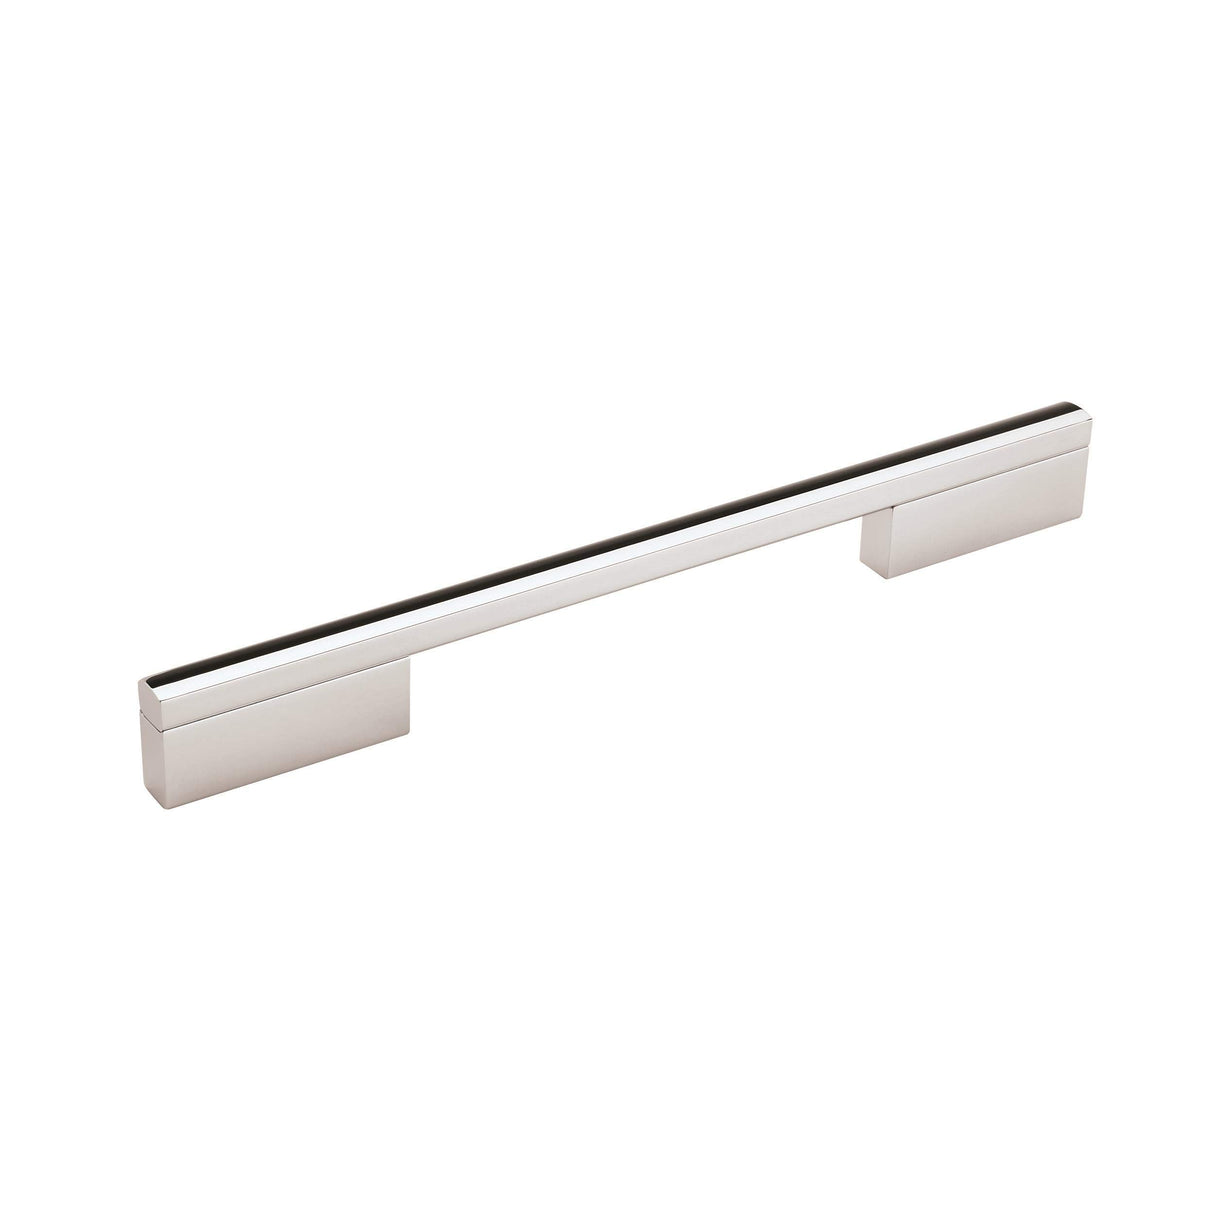 Amerock Cabinet Pull Polished Chrome 8 inch (203 mm) Center to Center Separa 1 Pack Drawer Pull Drawer Handle Cabinet Hardware